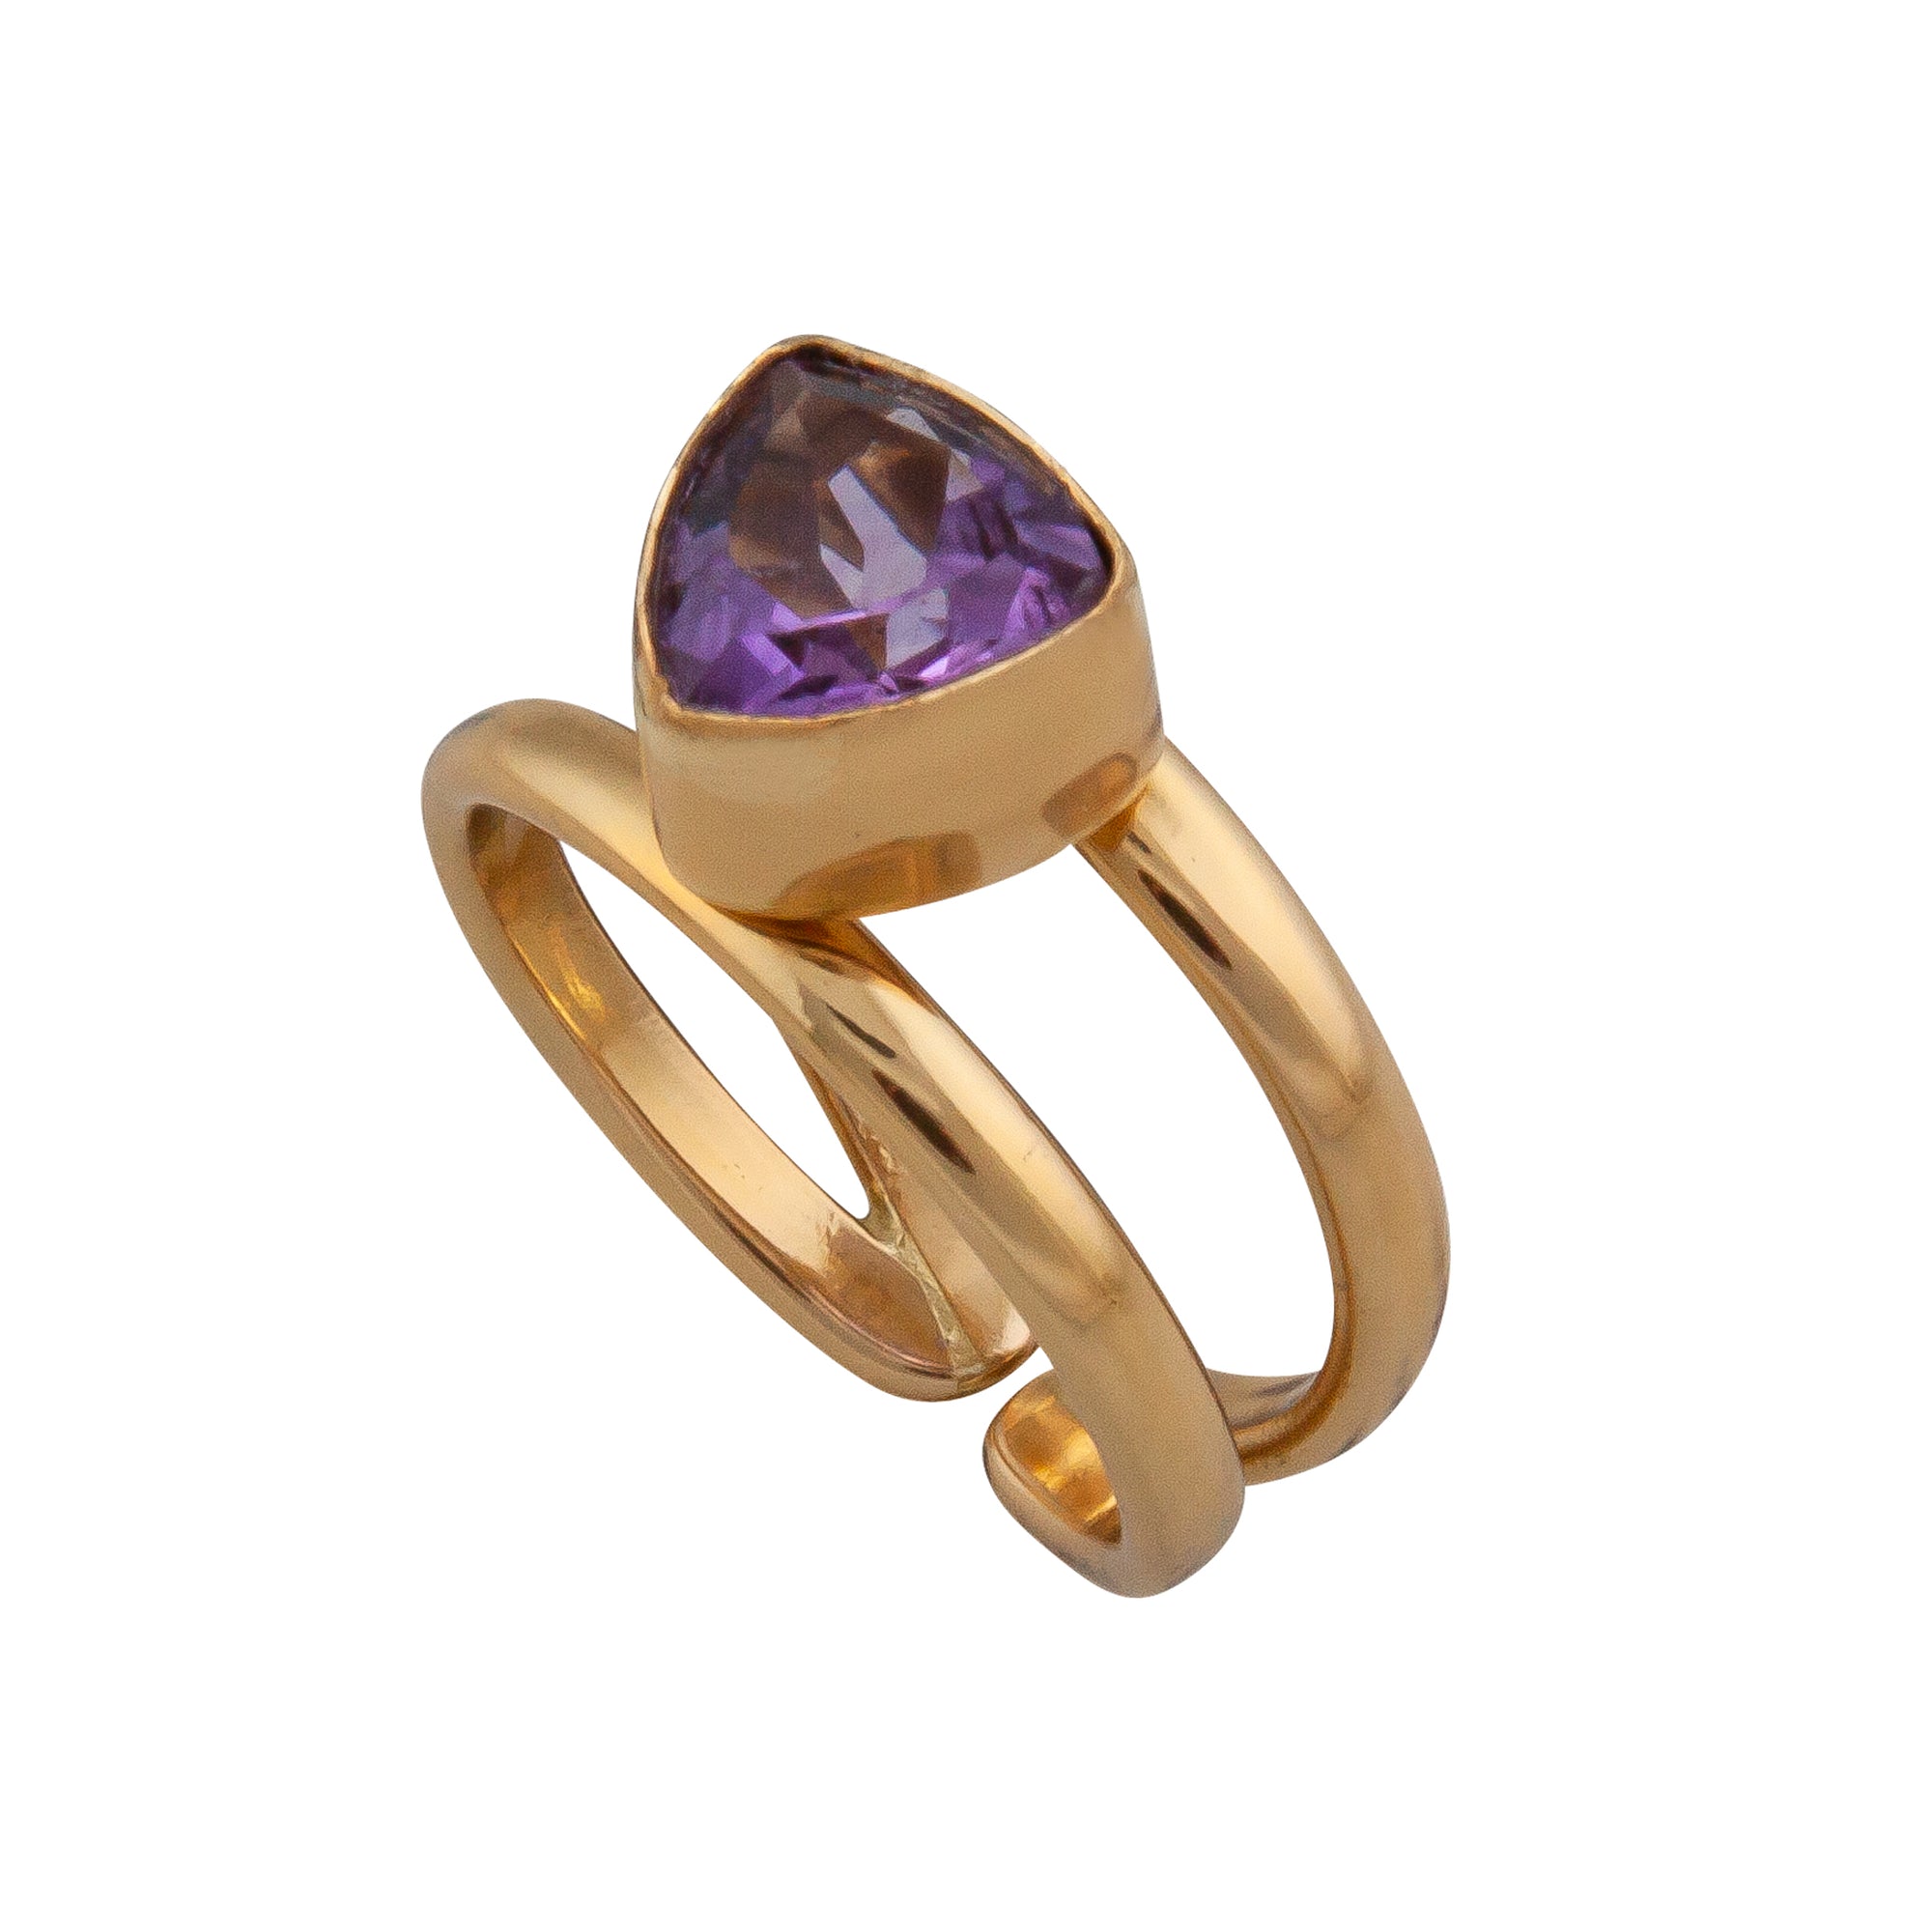 Charles Albert Jewelry - Alchemia Amethyst Trillion Double Band Cuff Ring - Front View